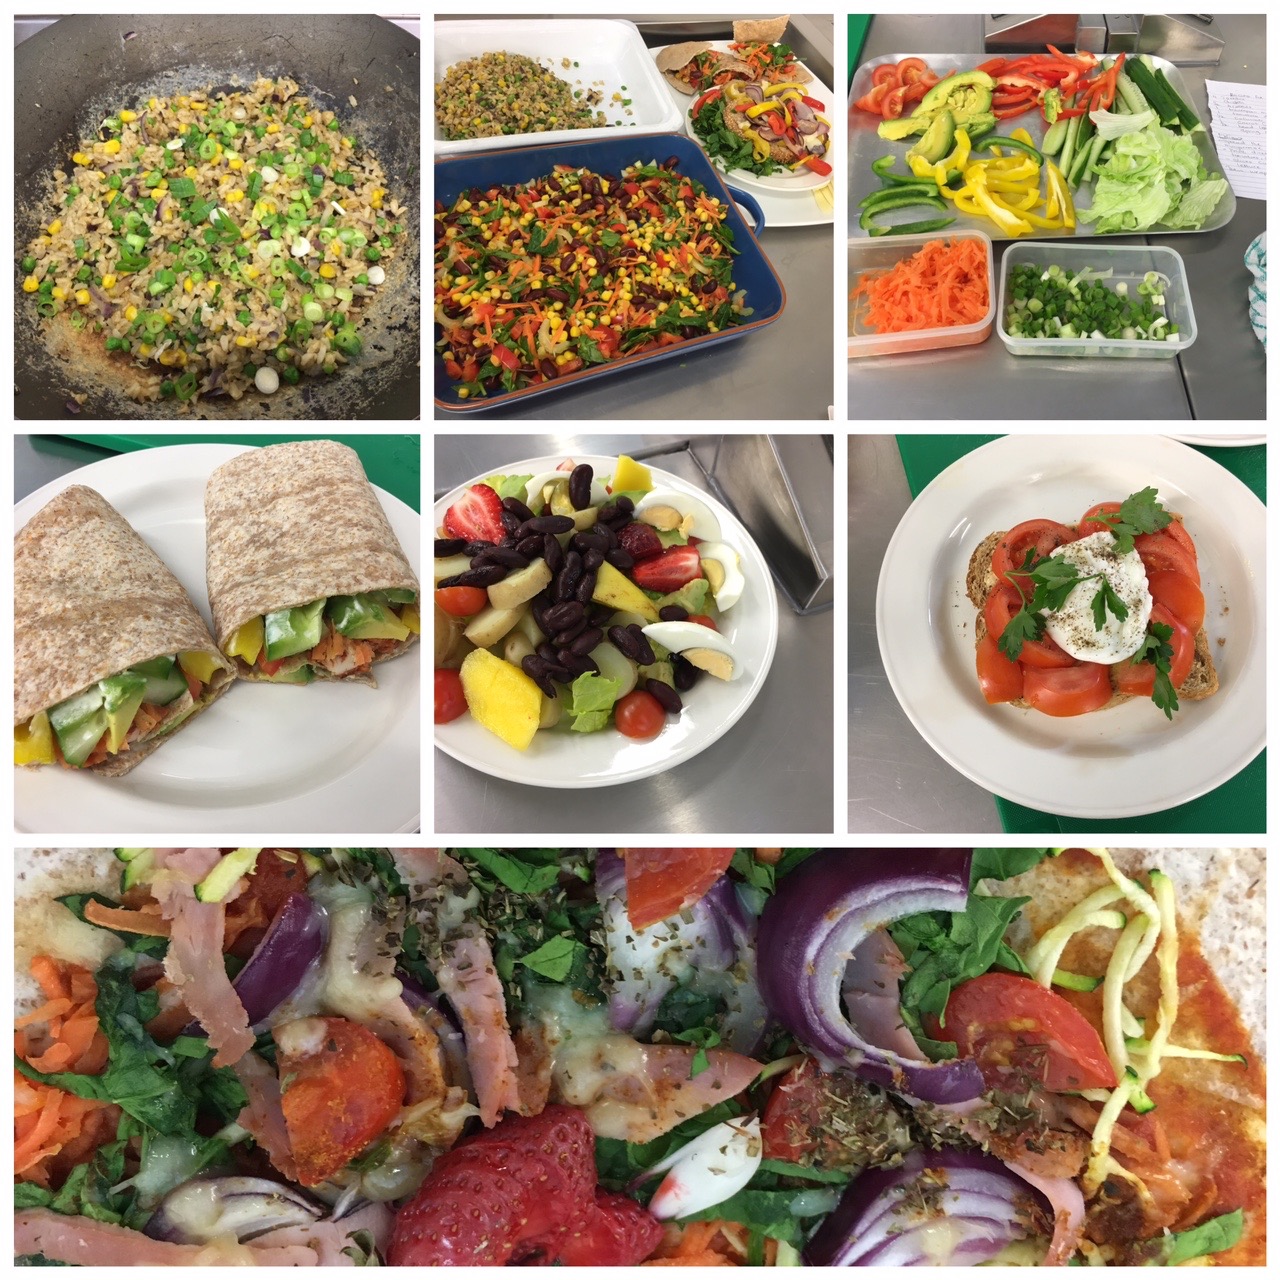 Lewisham Healthy eating Cookery Club tutor OCN Course How to run a cookery club